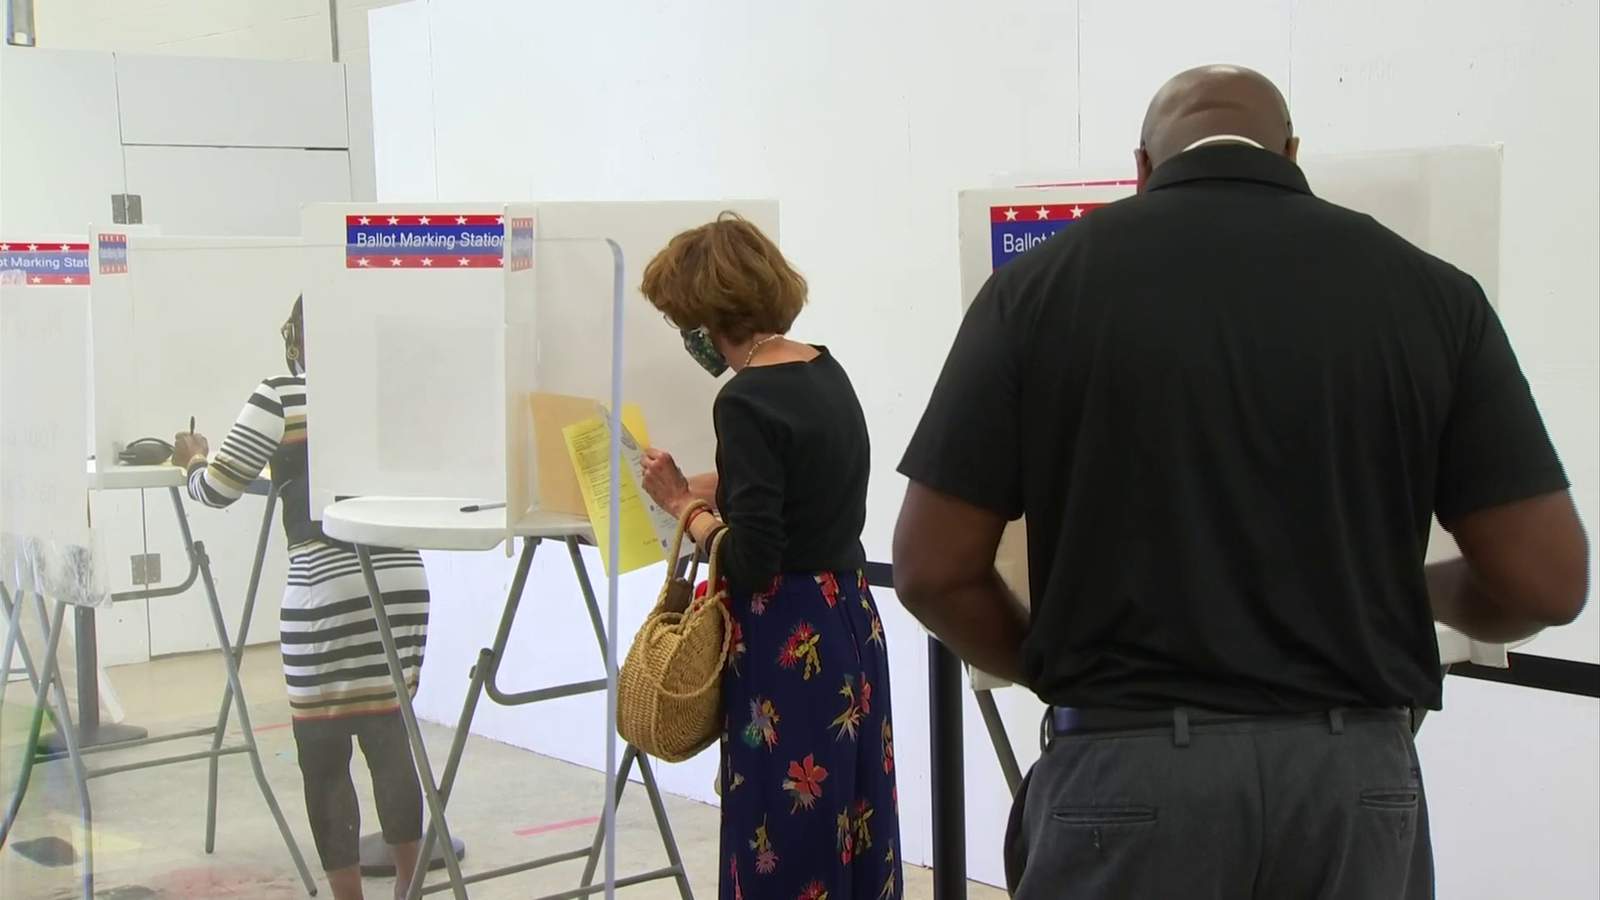 Here’s what you need to know to vote early in Virginia